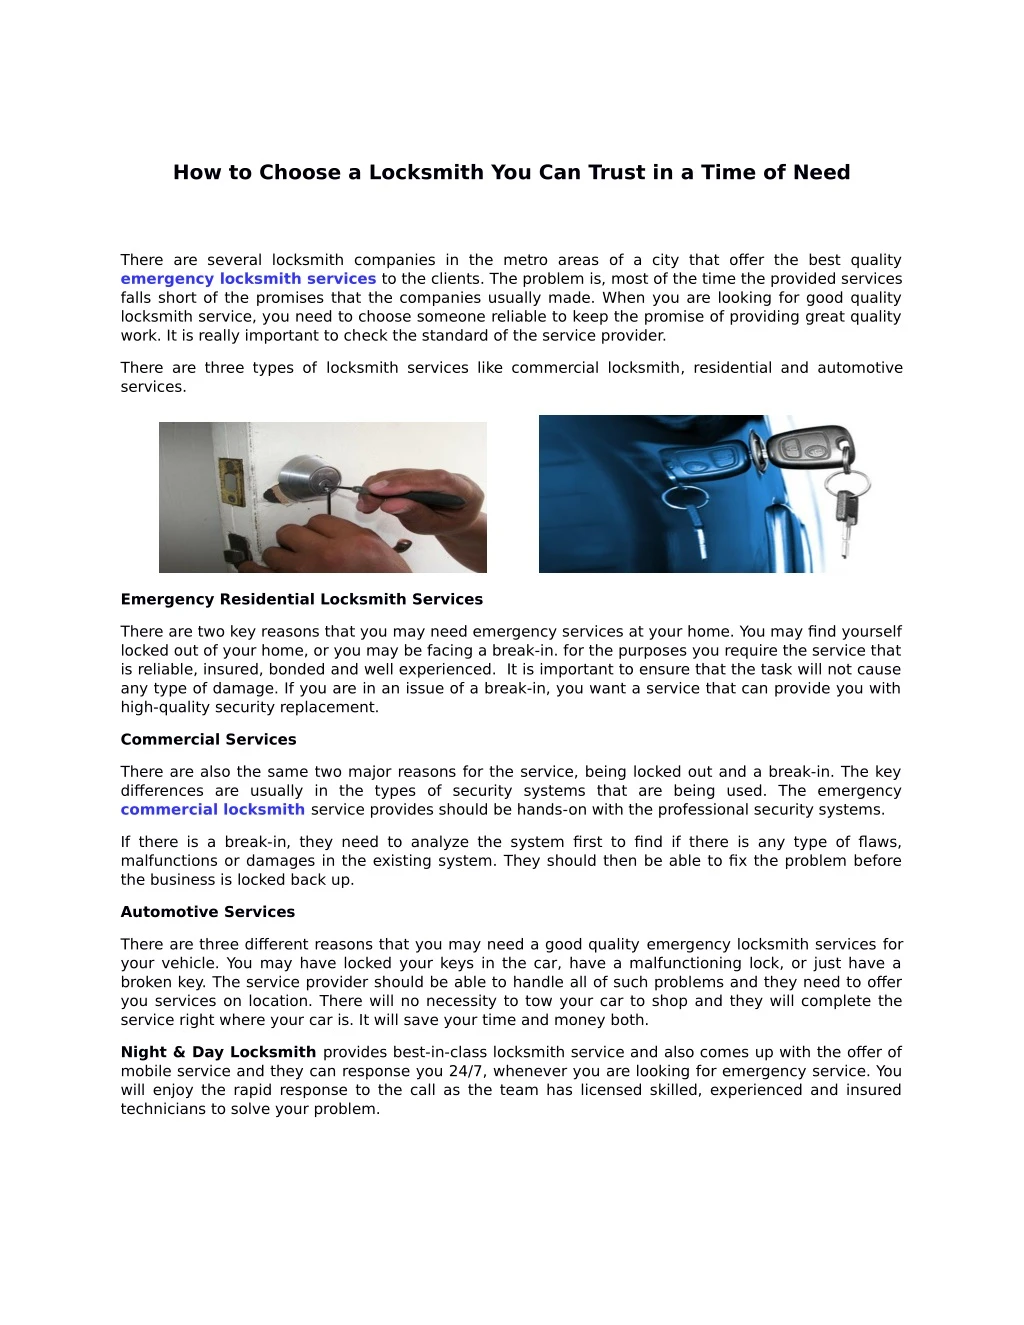 how to choose a locksmith you can trust in a time